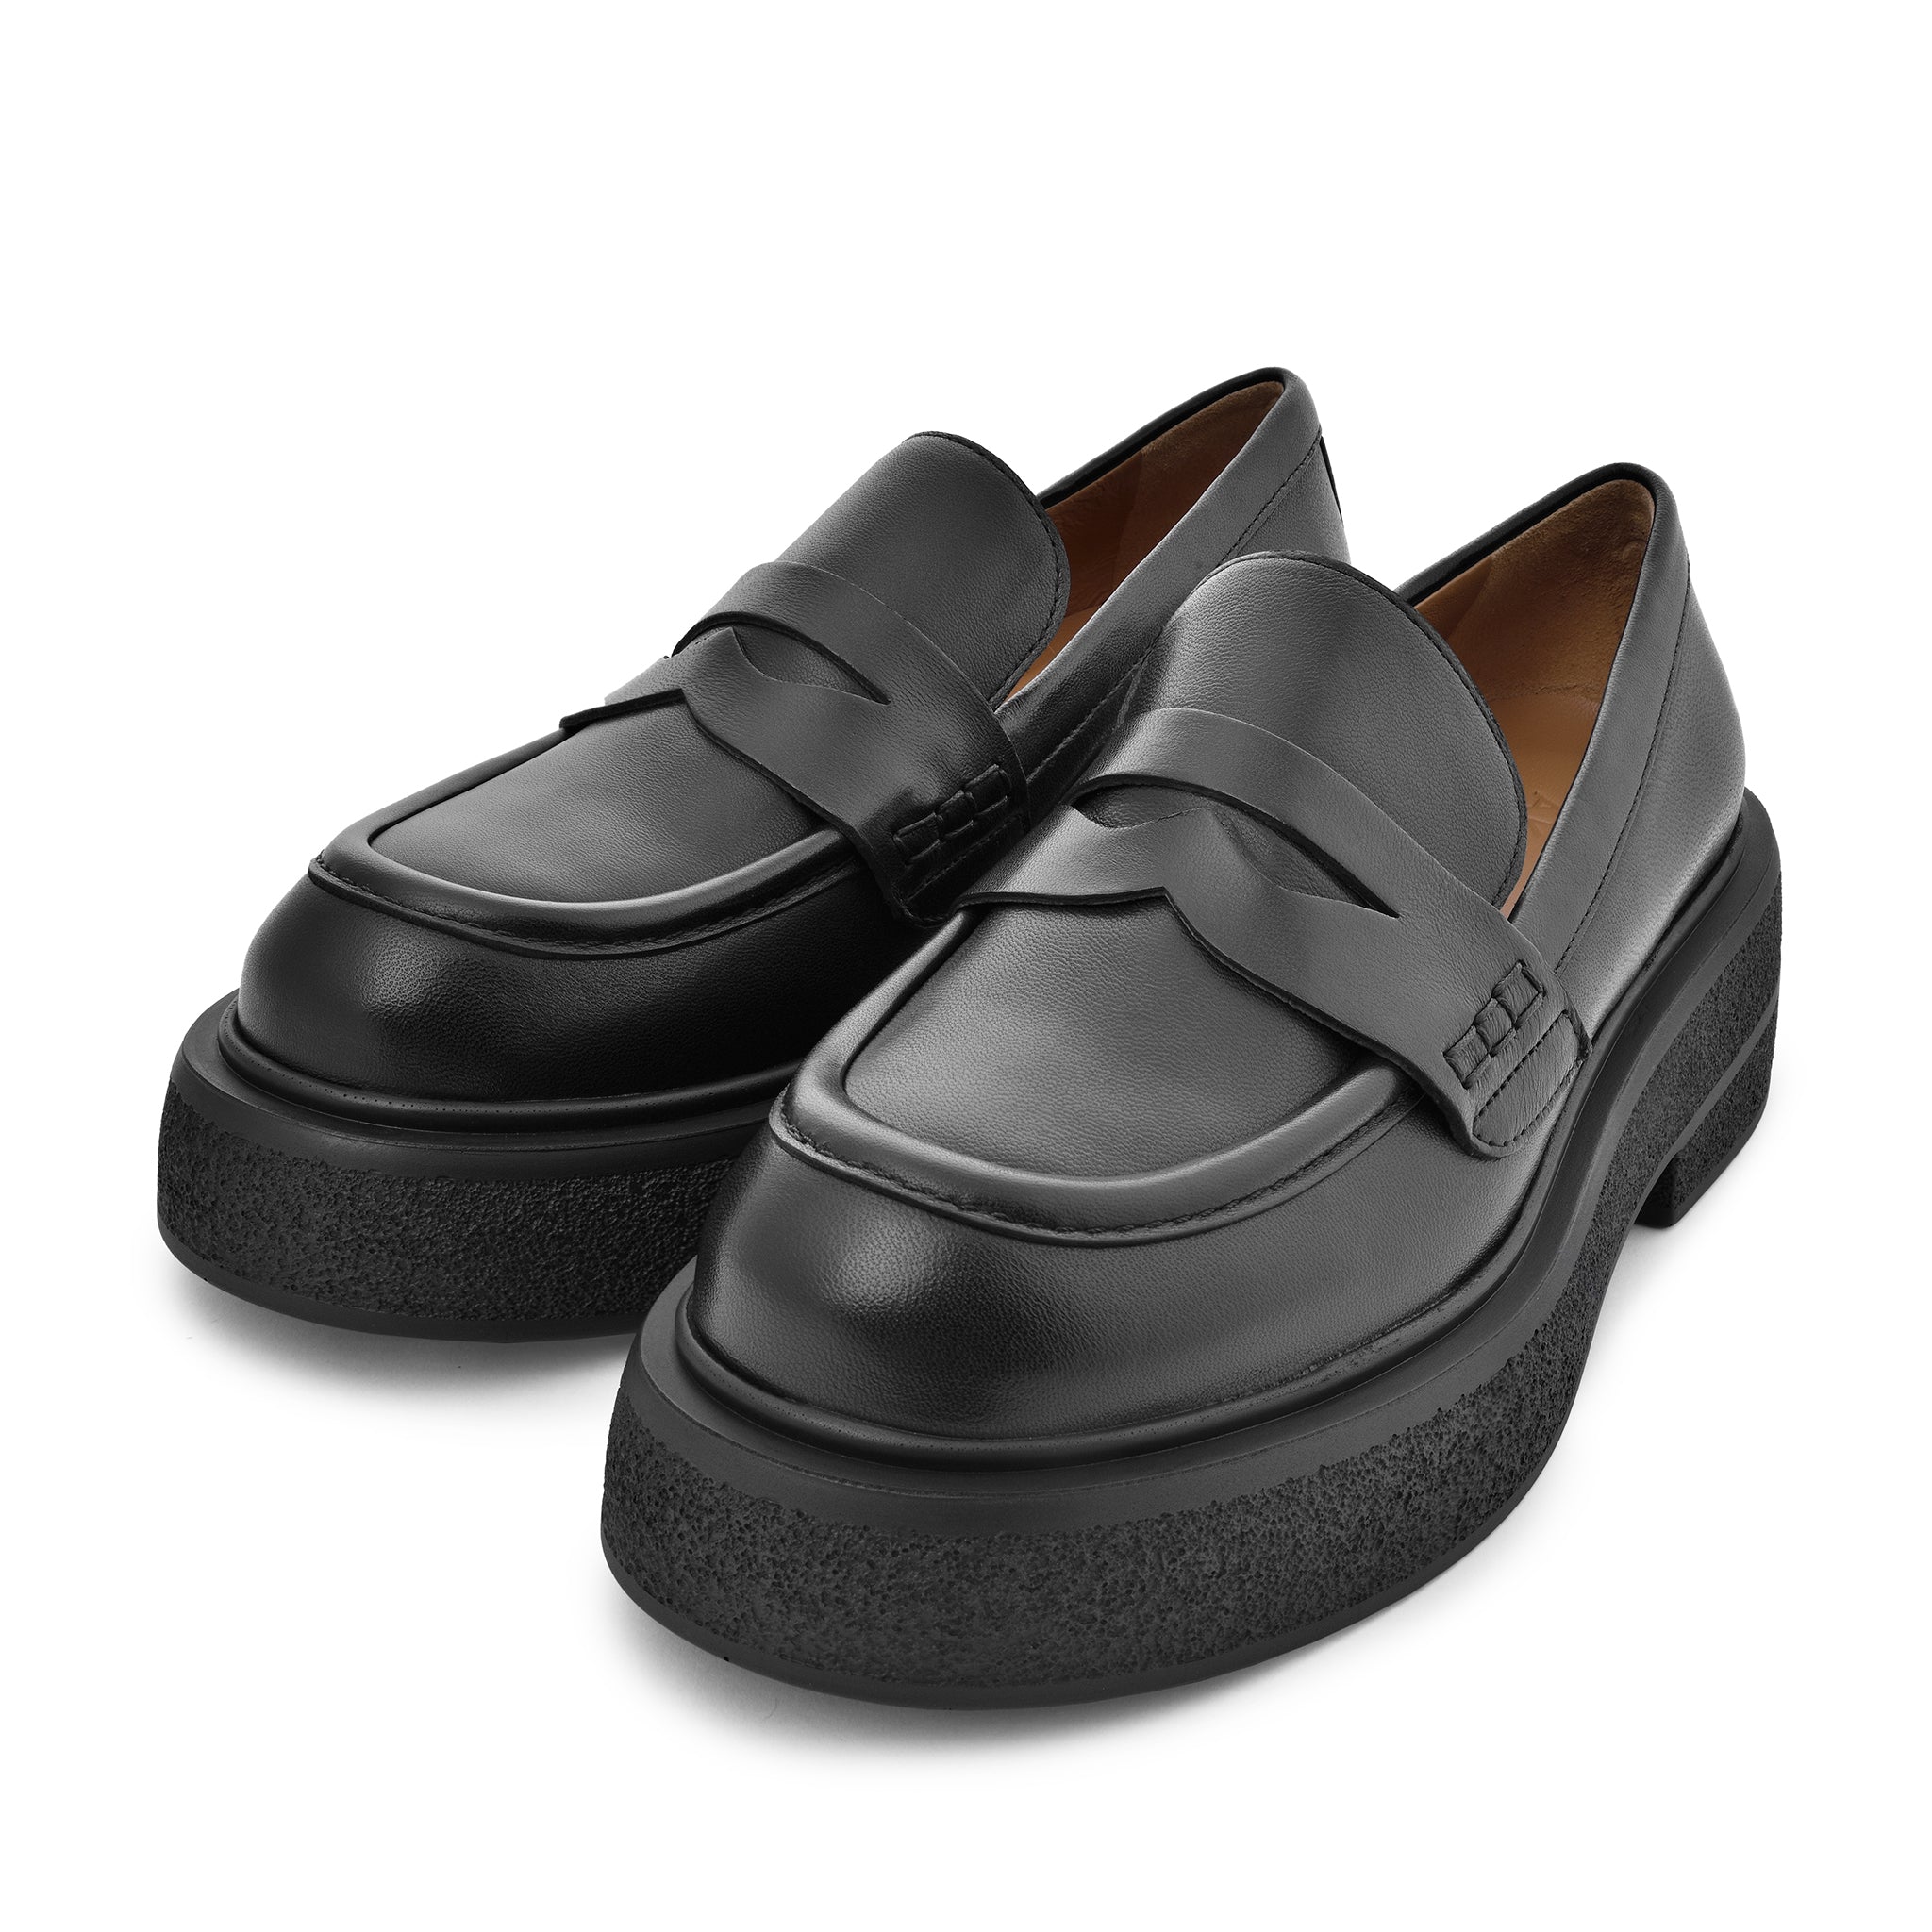 Mikka Black Leather Chunky Loafers D1304Black_BIS - 6